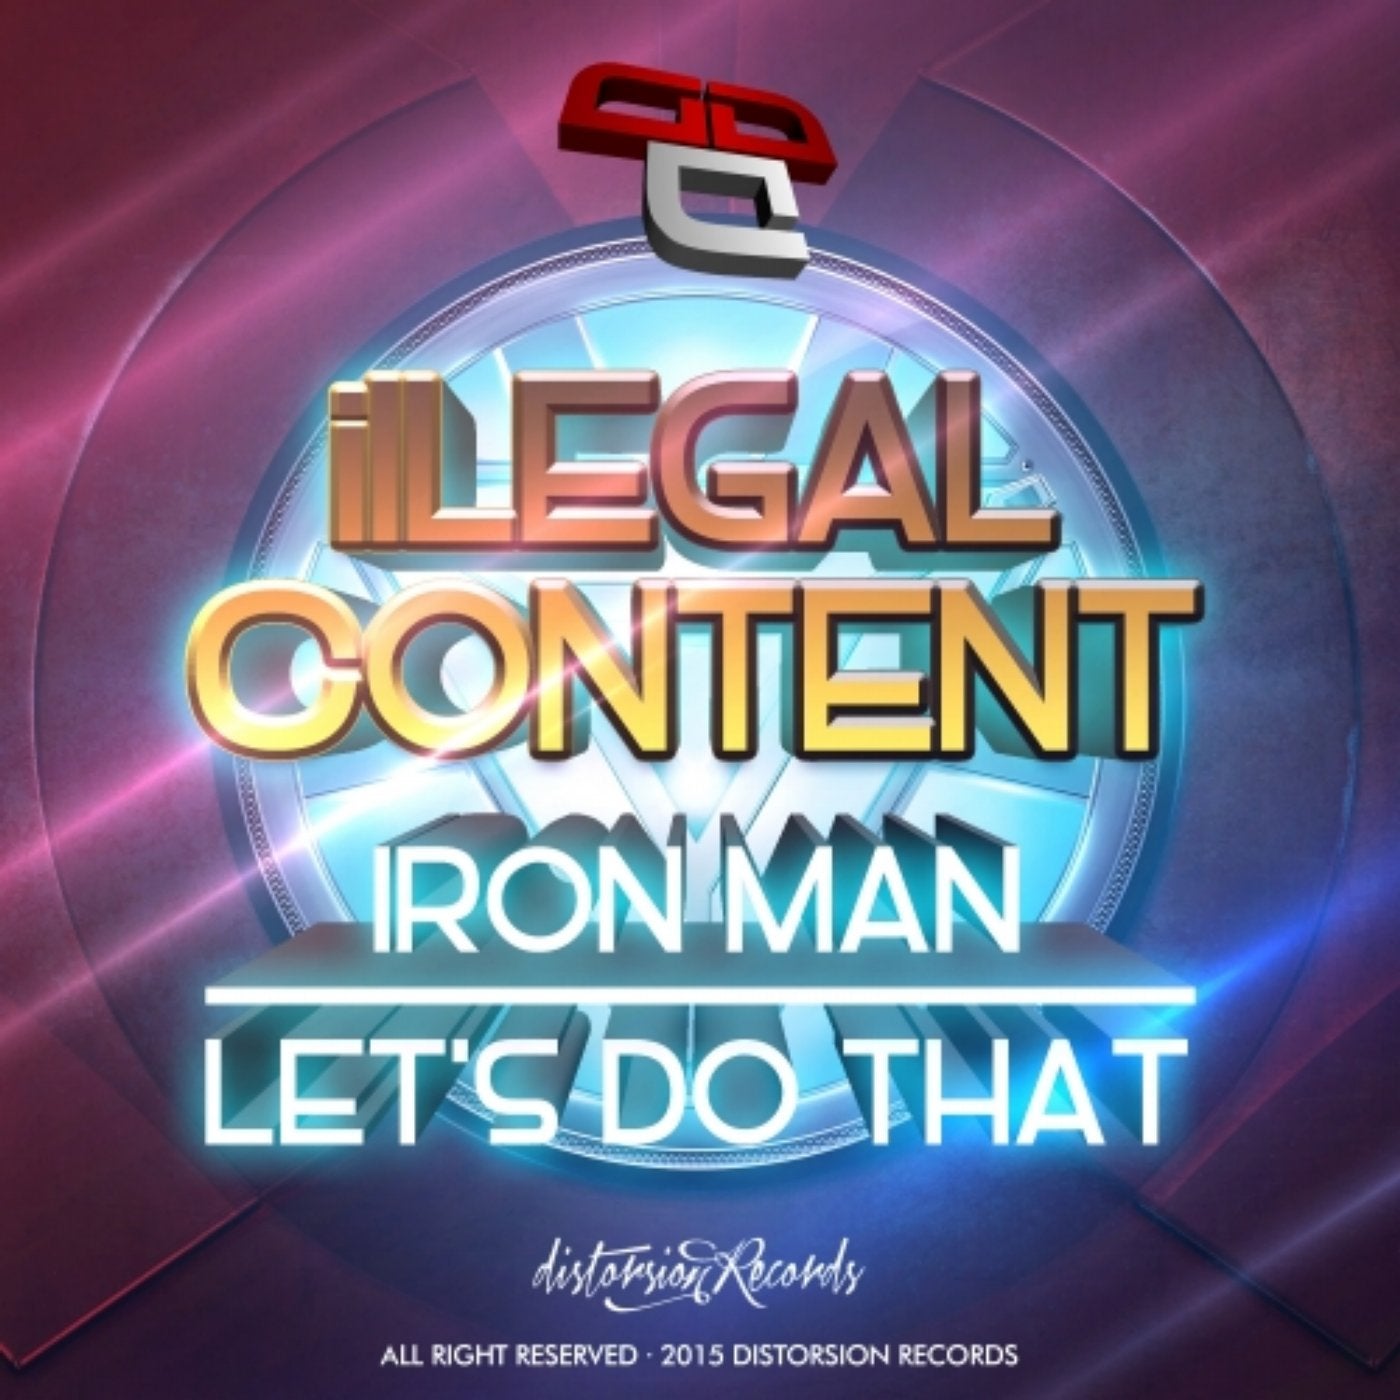 Iron Man / Lets Do That